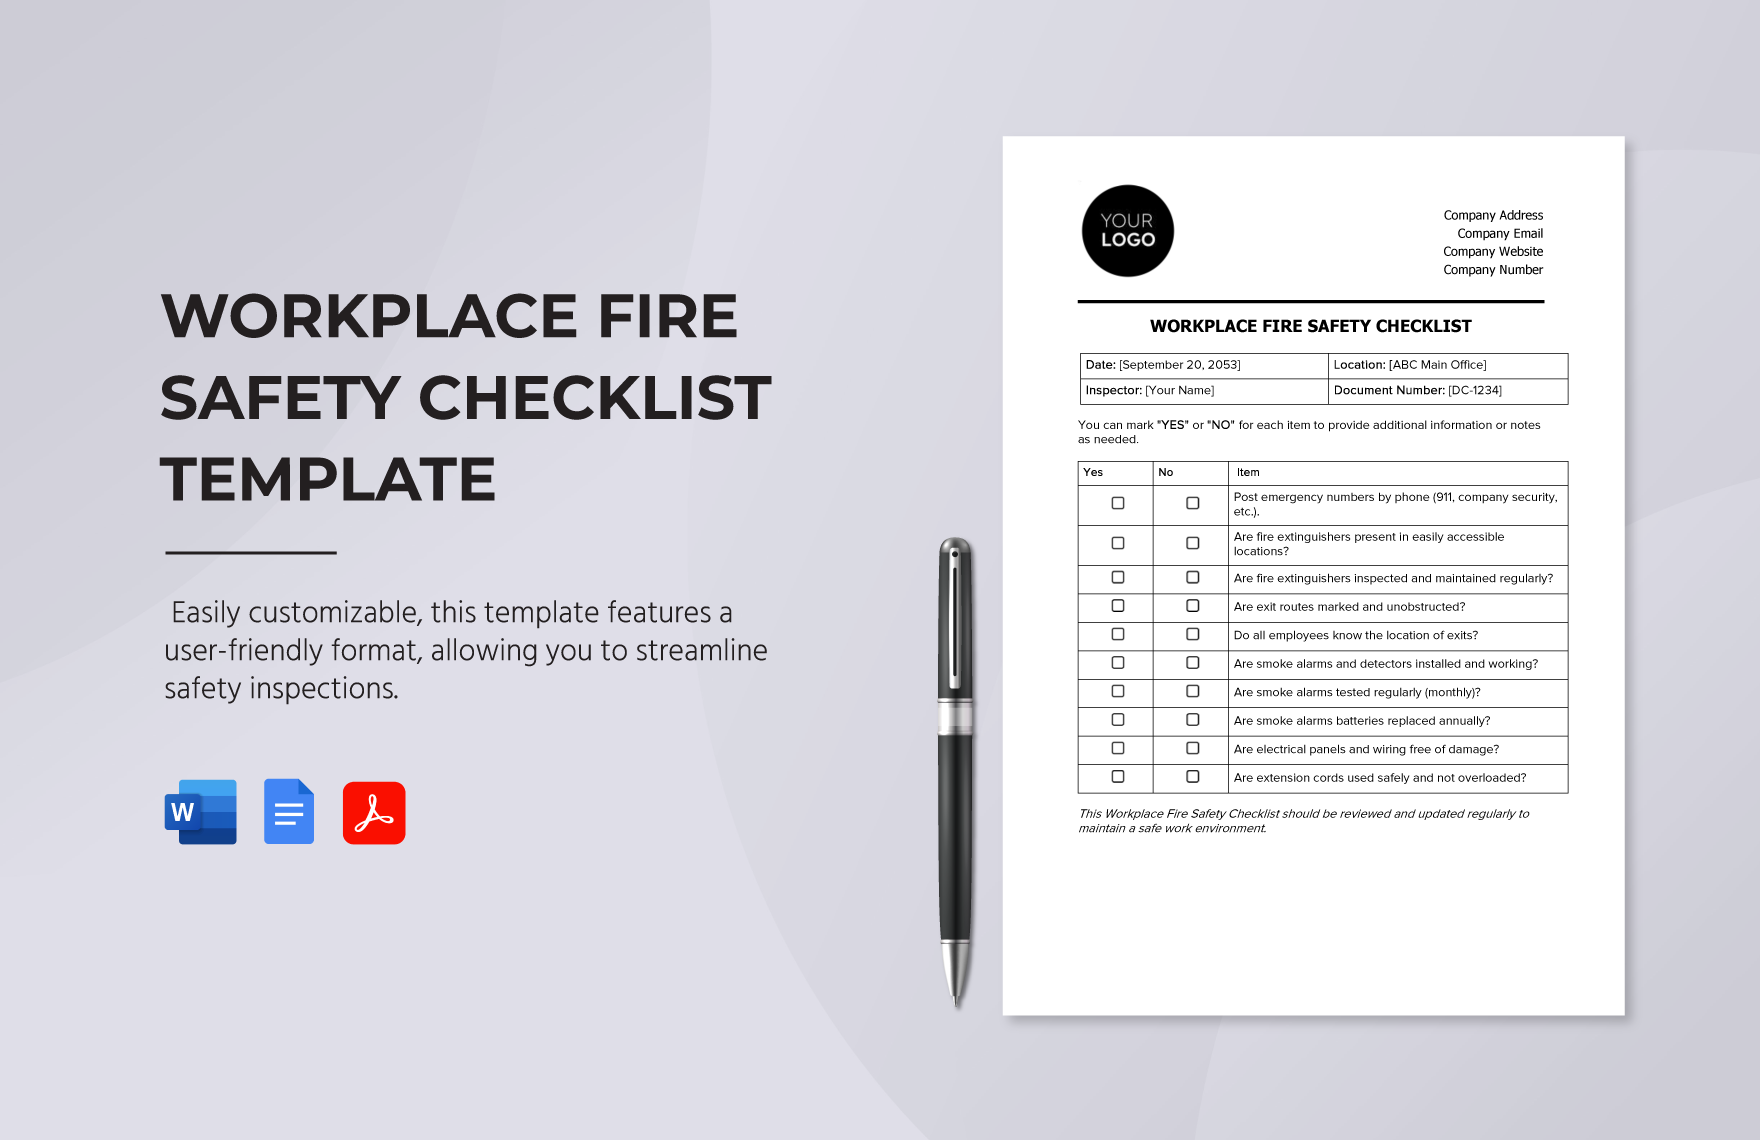 Workplace Fire Safety Checklist Template in Word, Google Docs, PDF